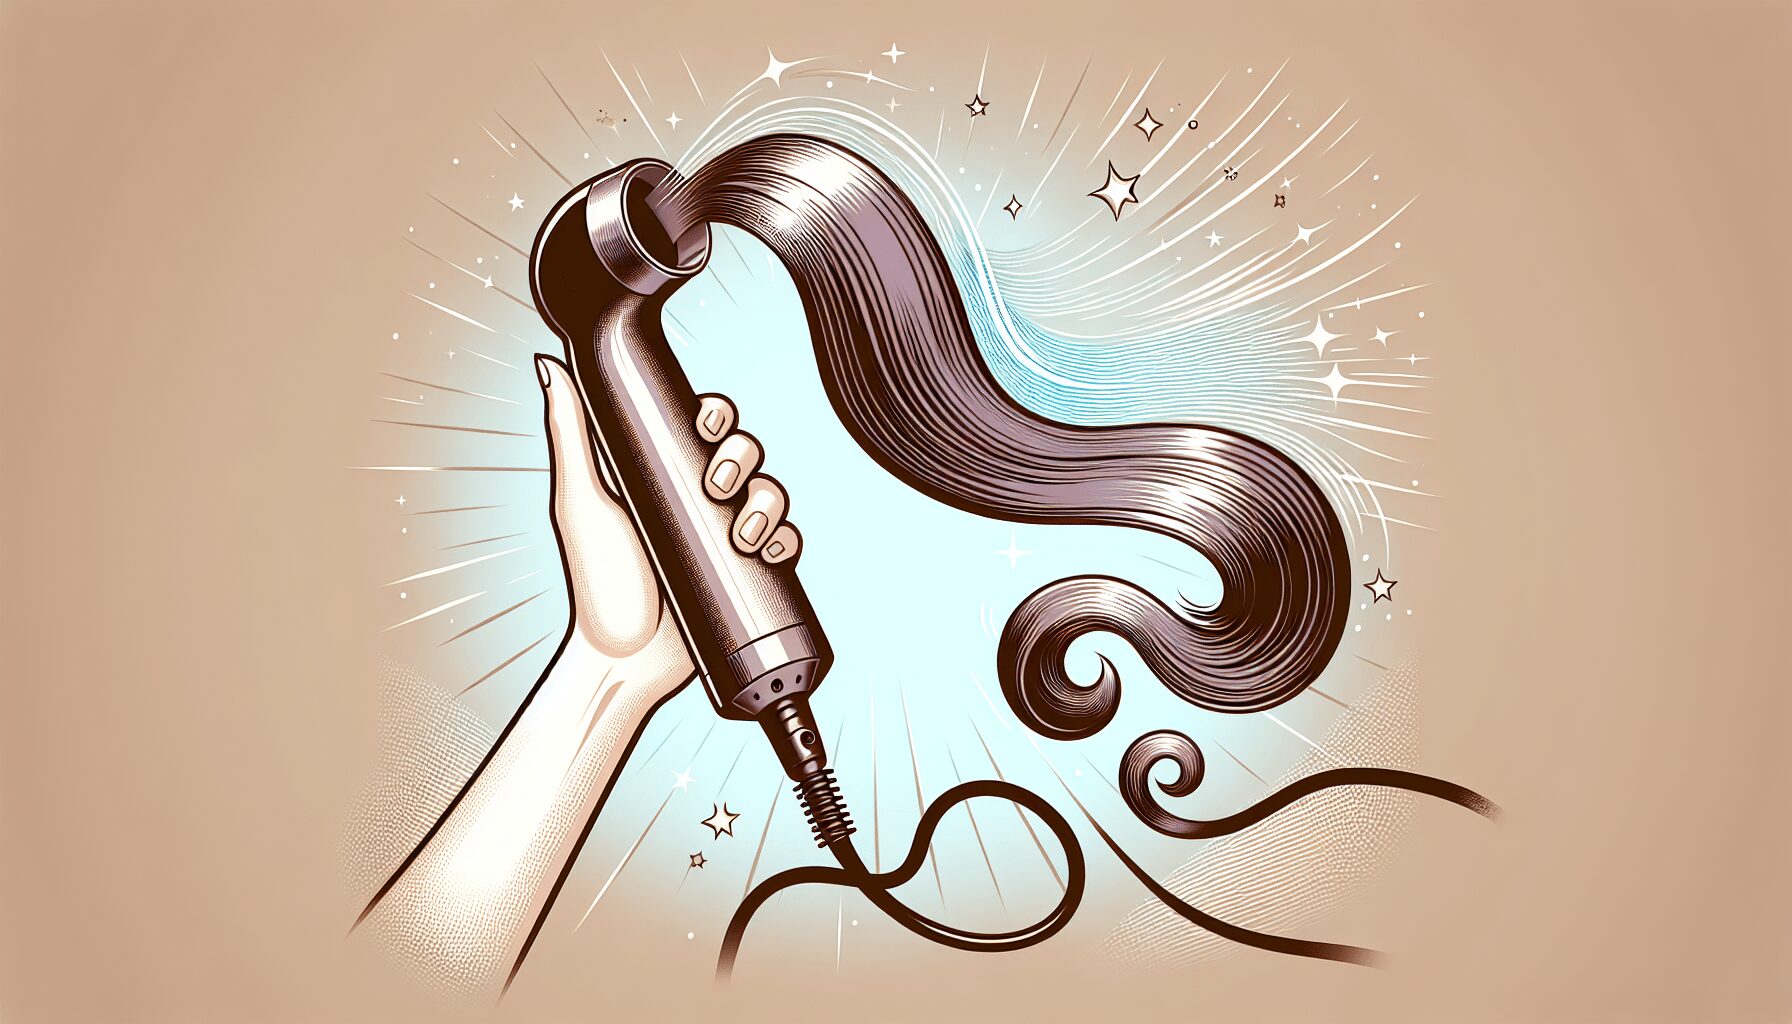 Does The Dyson Airwrap Curl Your Hair?